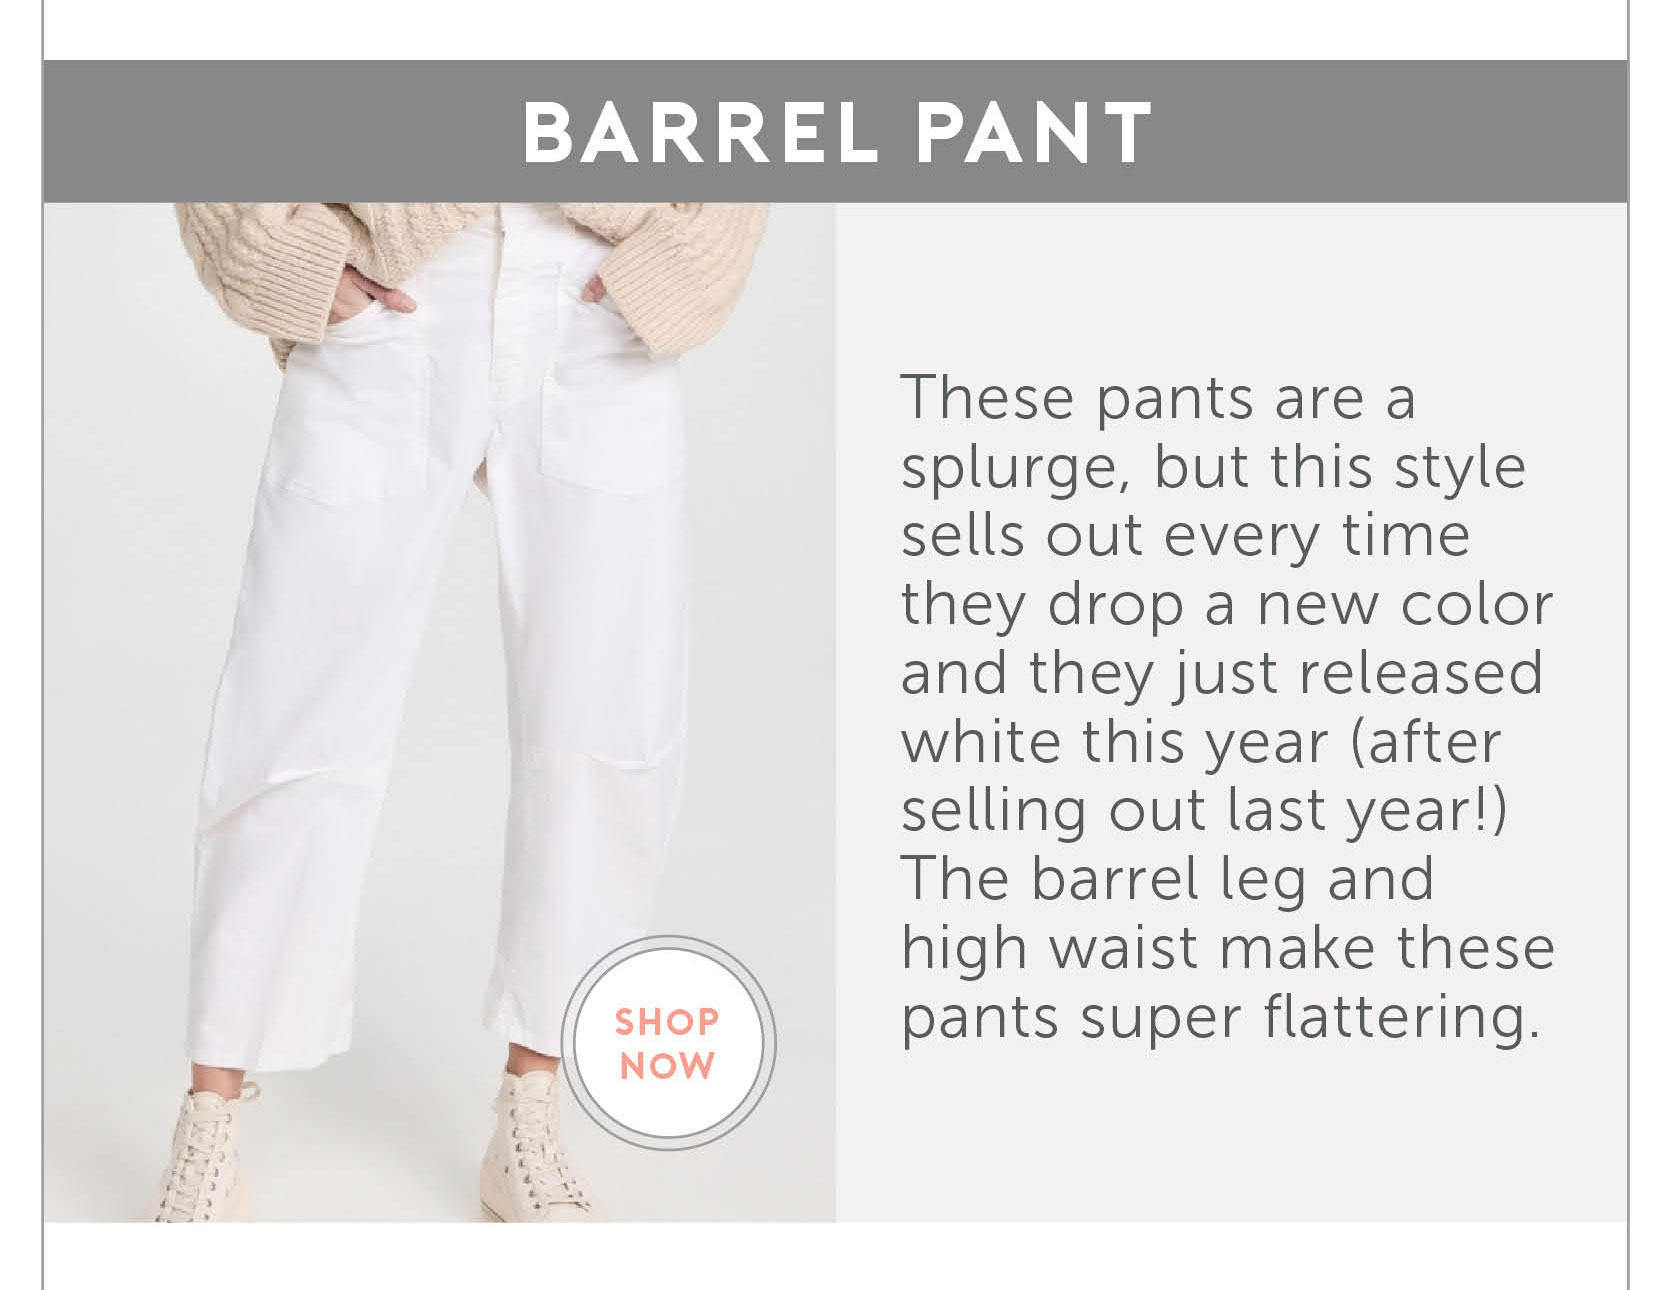 3. Barrel Pant These pants are a splurge, but this style sells out every time they drop a new color and they just released white this year (after selling out last year!) The barrel leg and high waist make these pants super flattering.